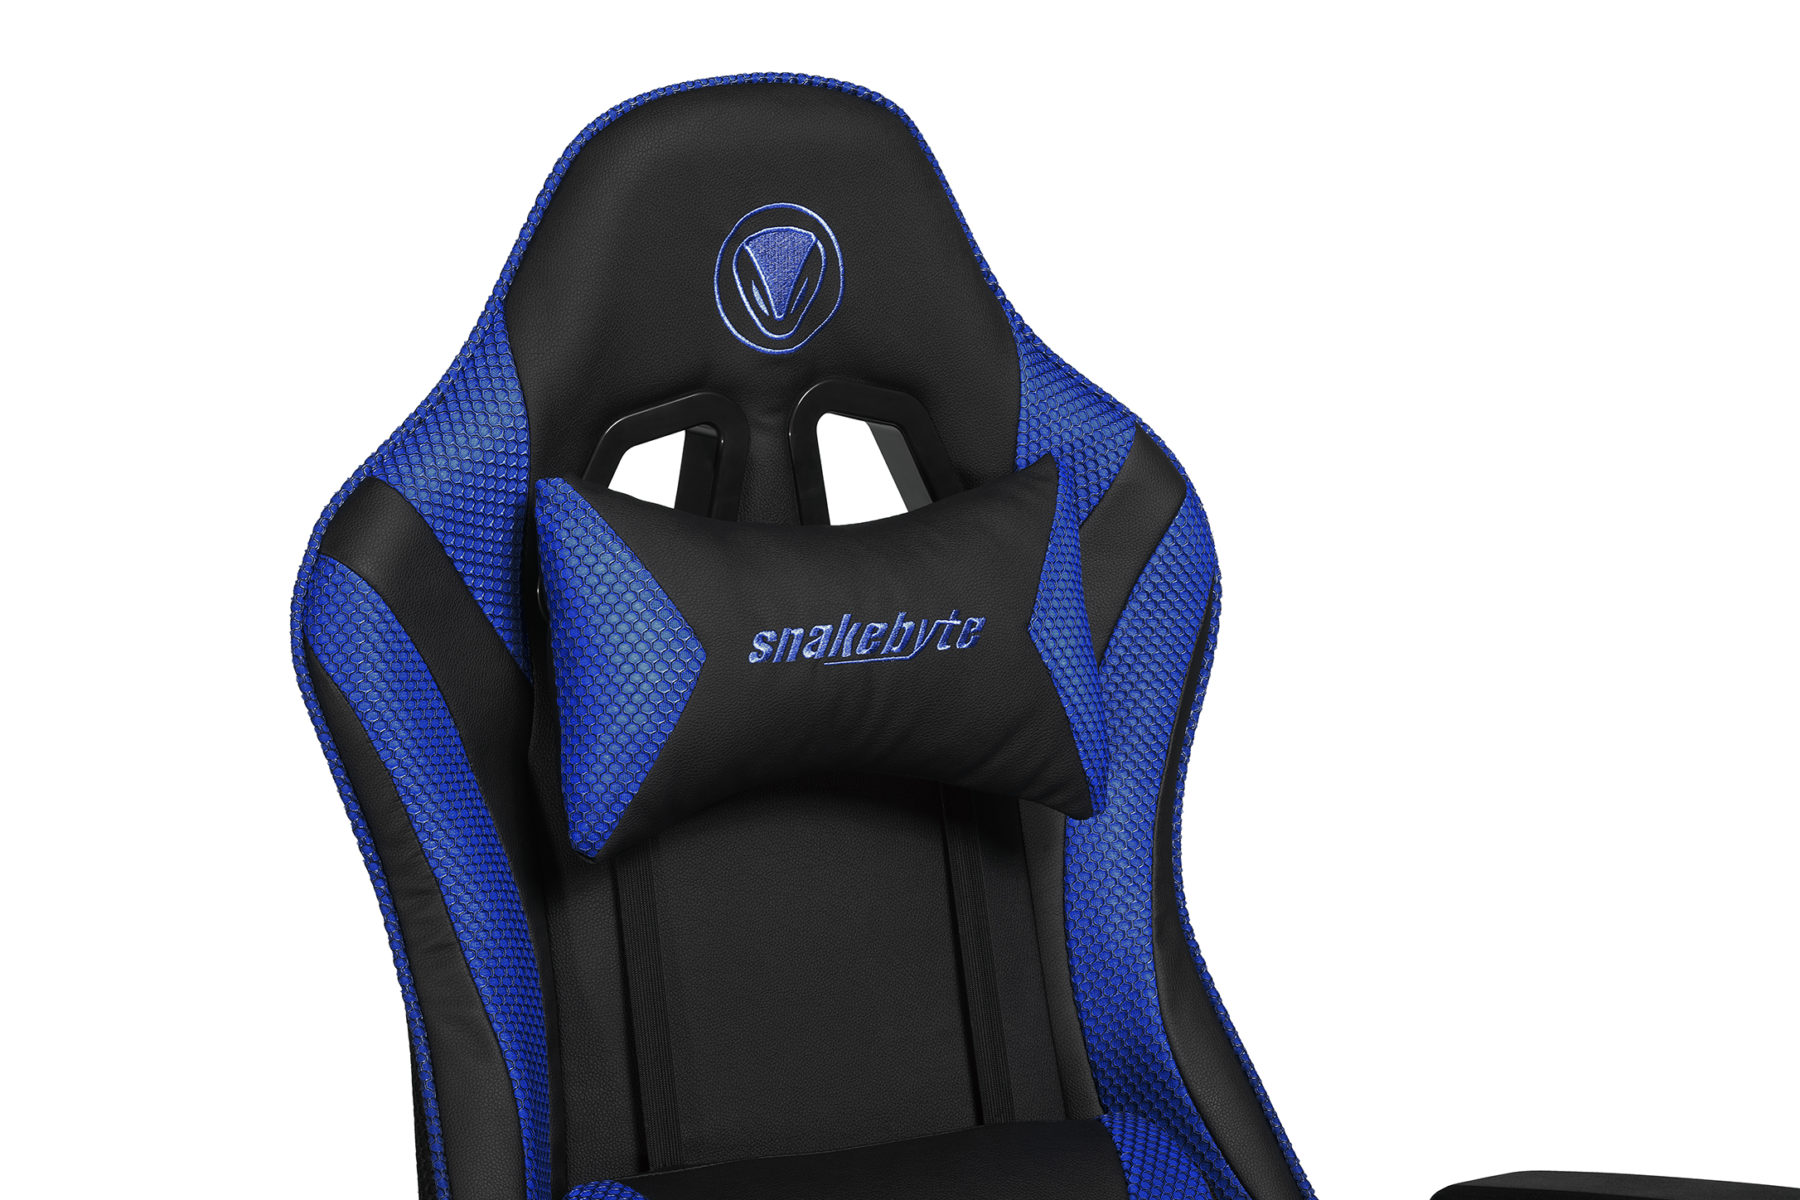 Snakebyte Gaming Chair Pro